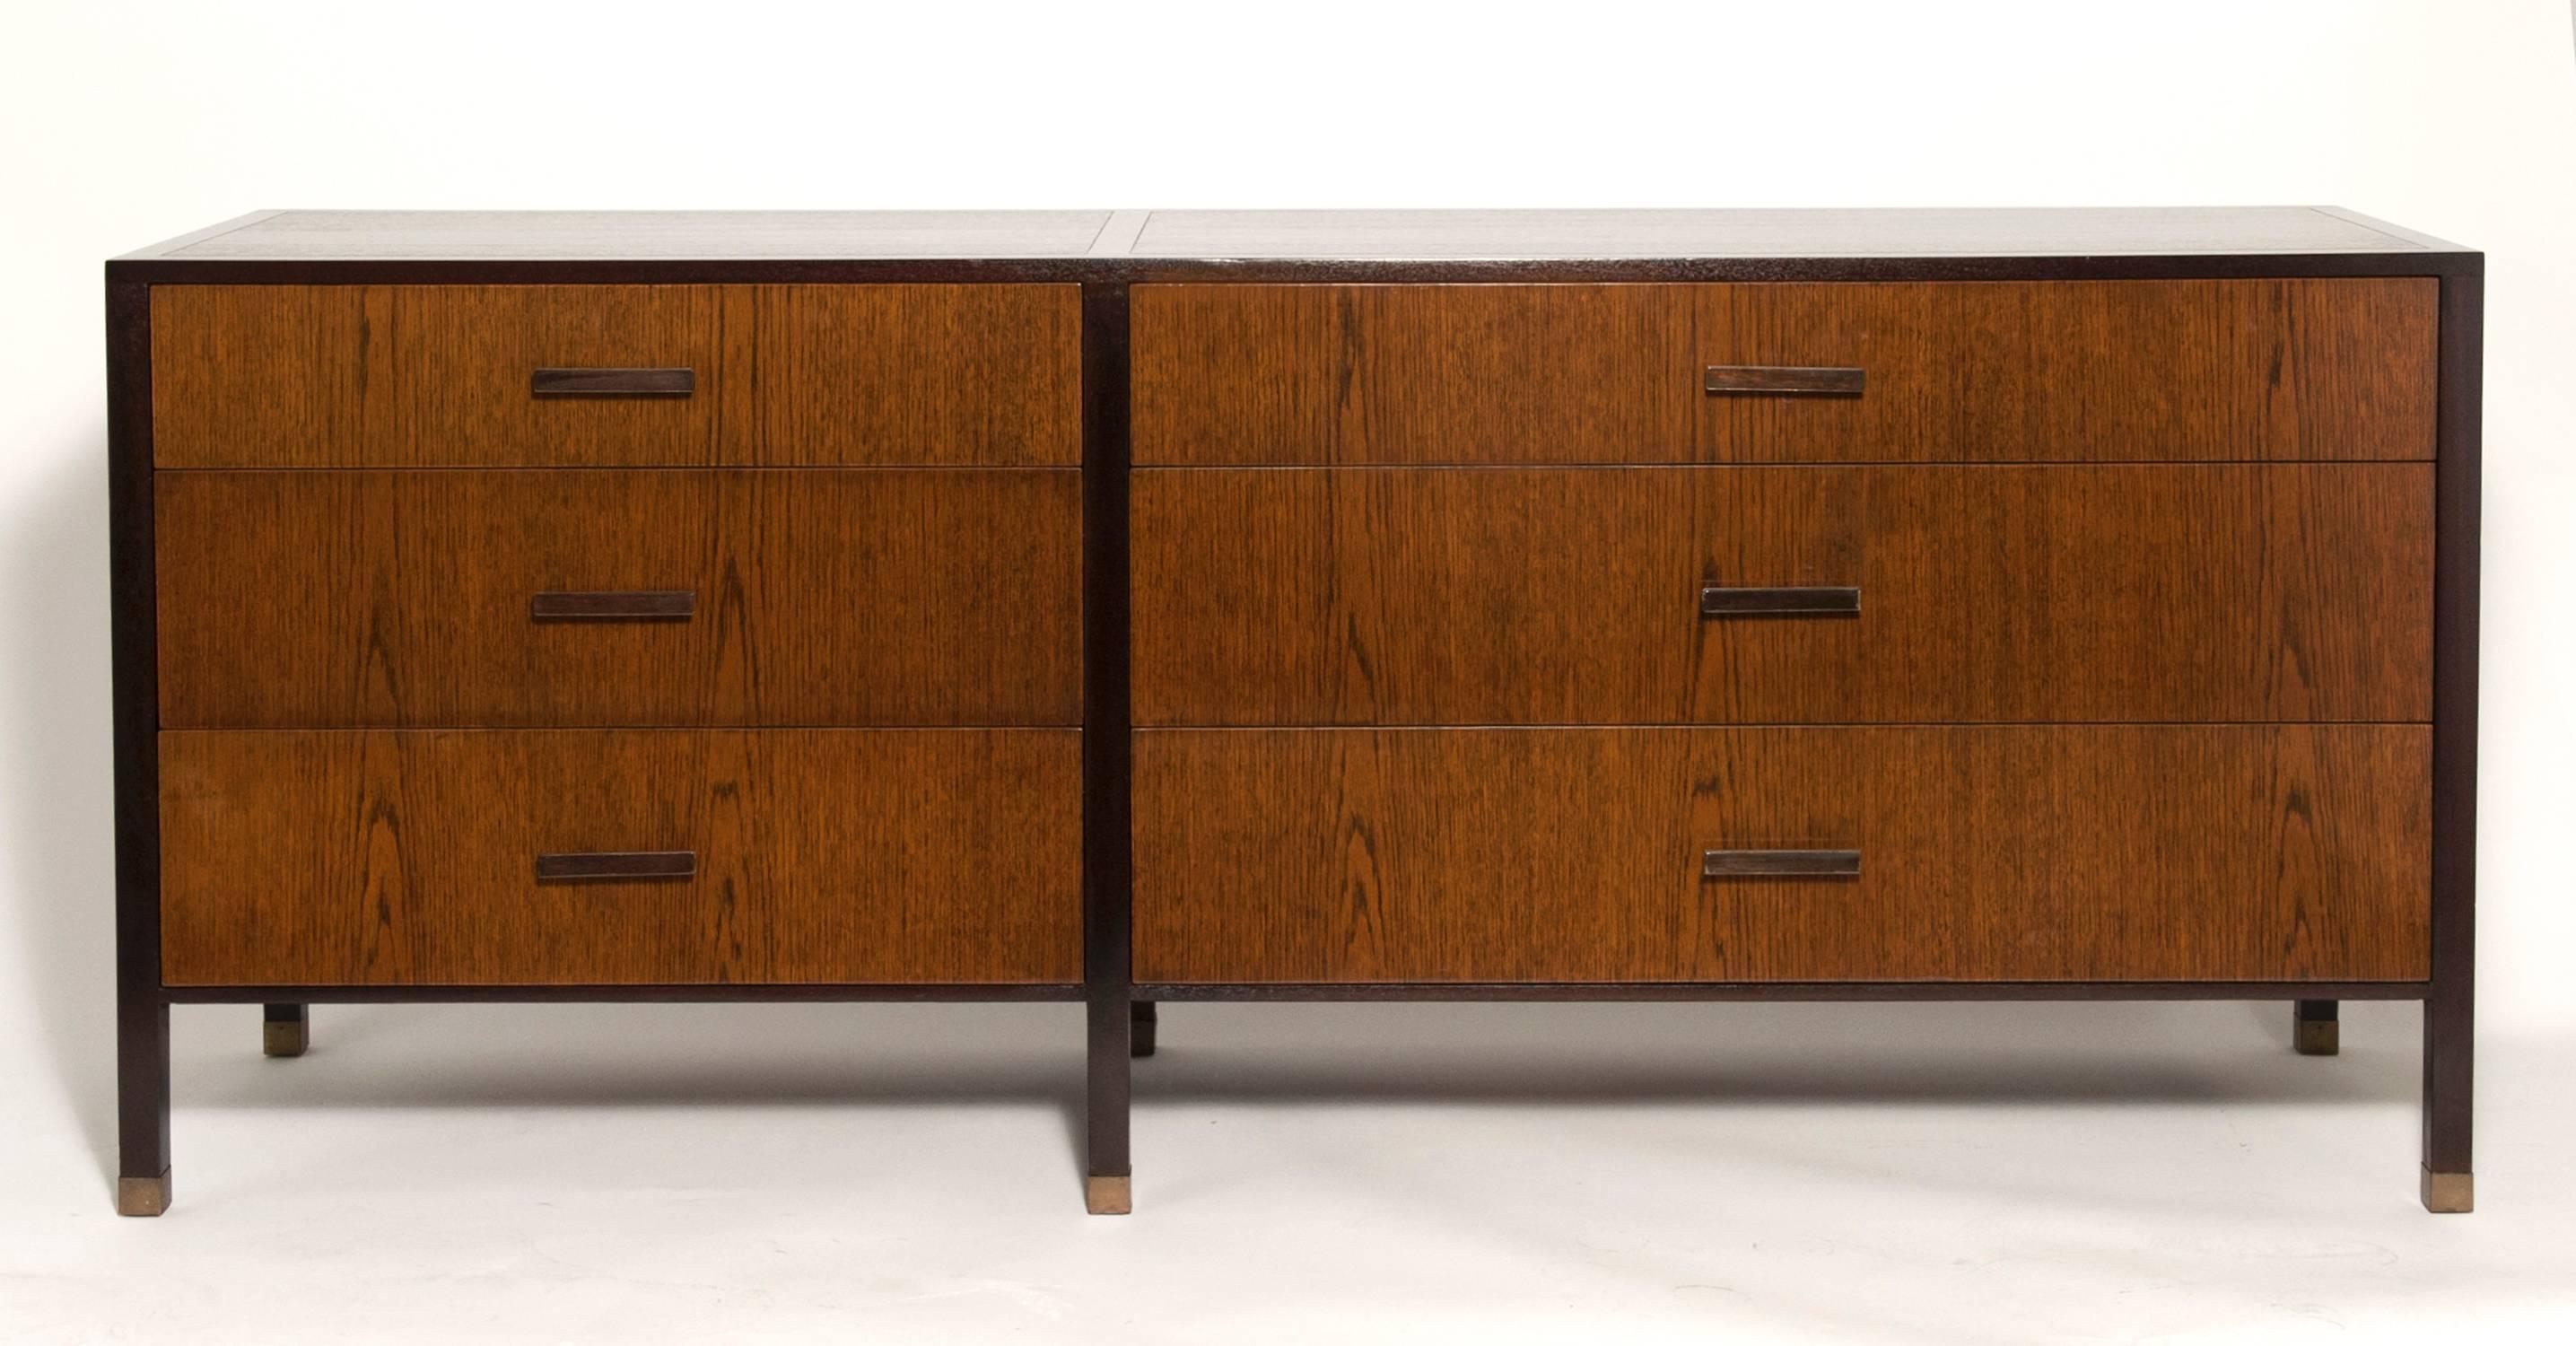 Signed: Six-drawer dresser designed by Harvey Probber. Top quality design and materials. Clean and ready for use.